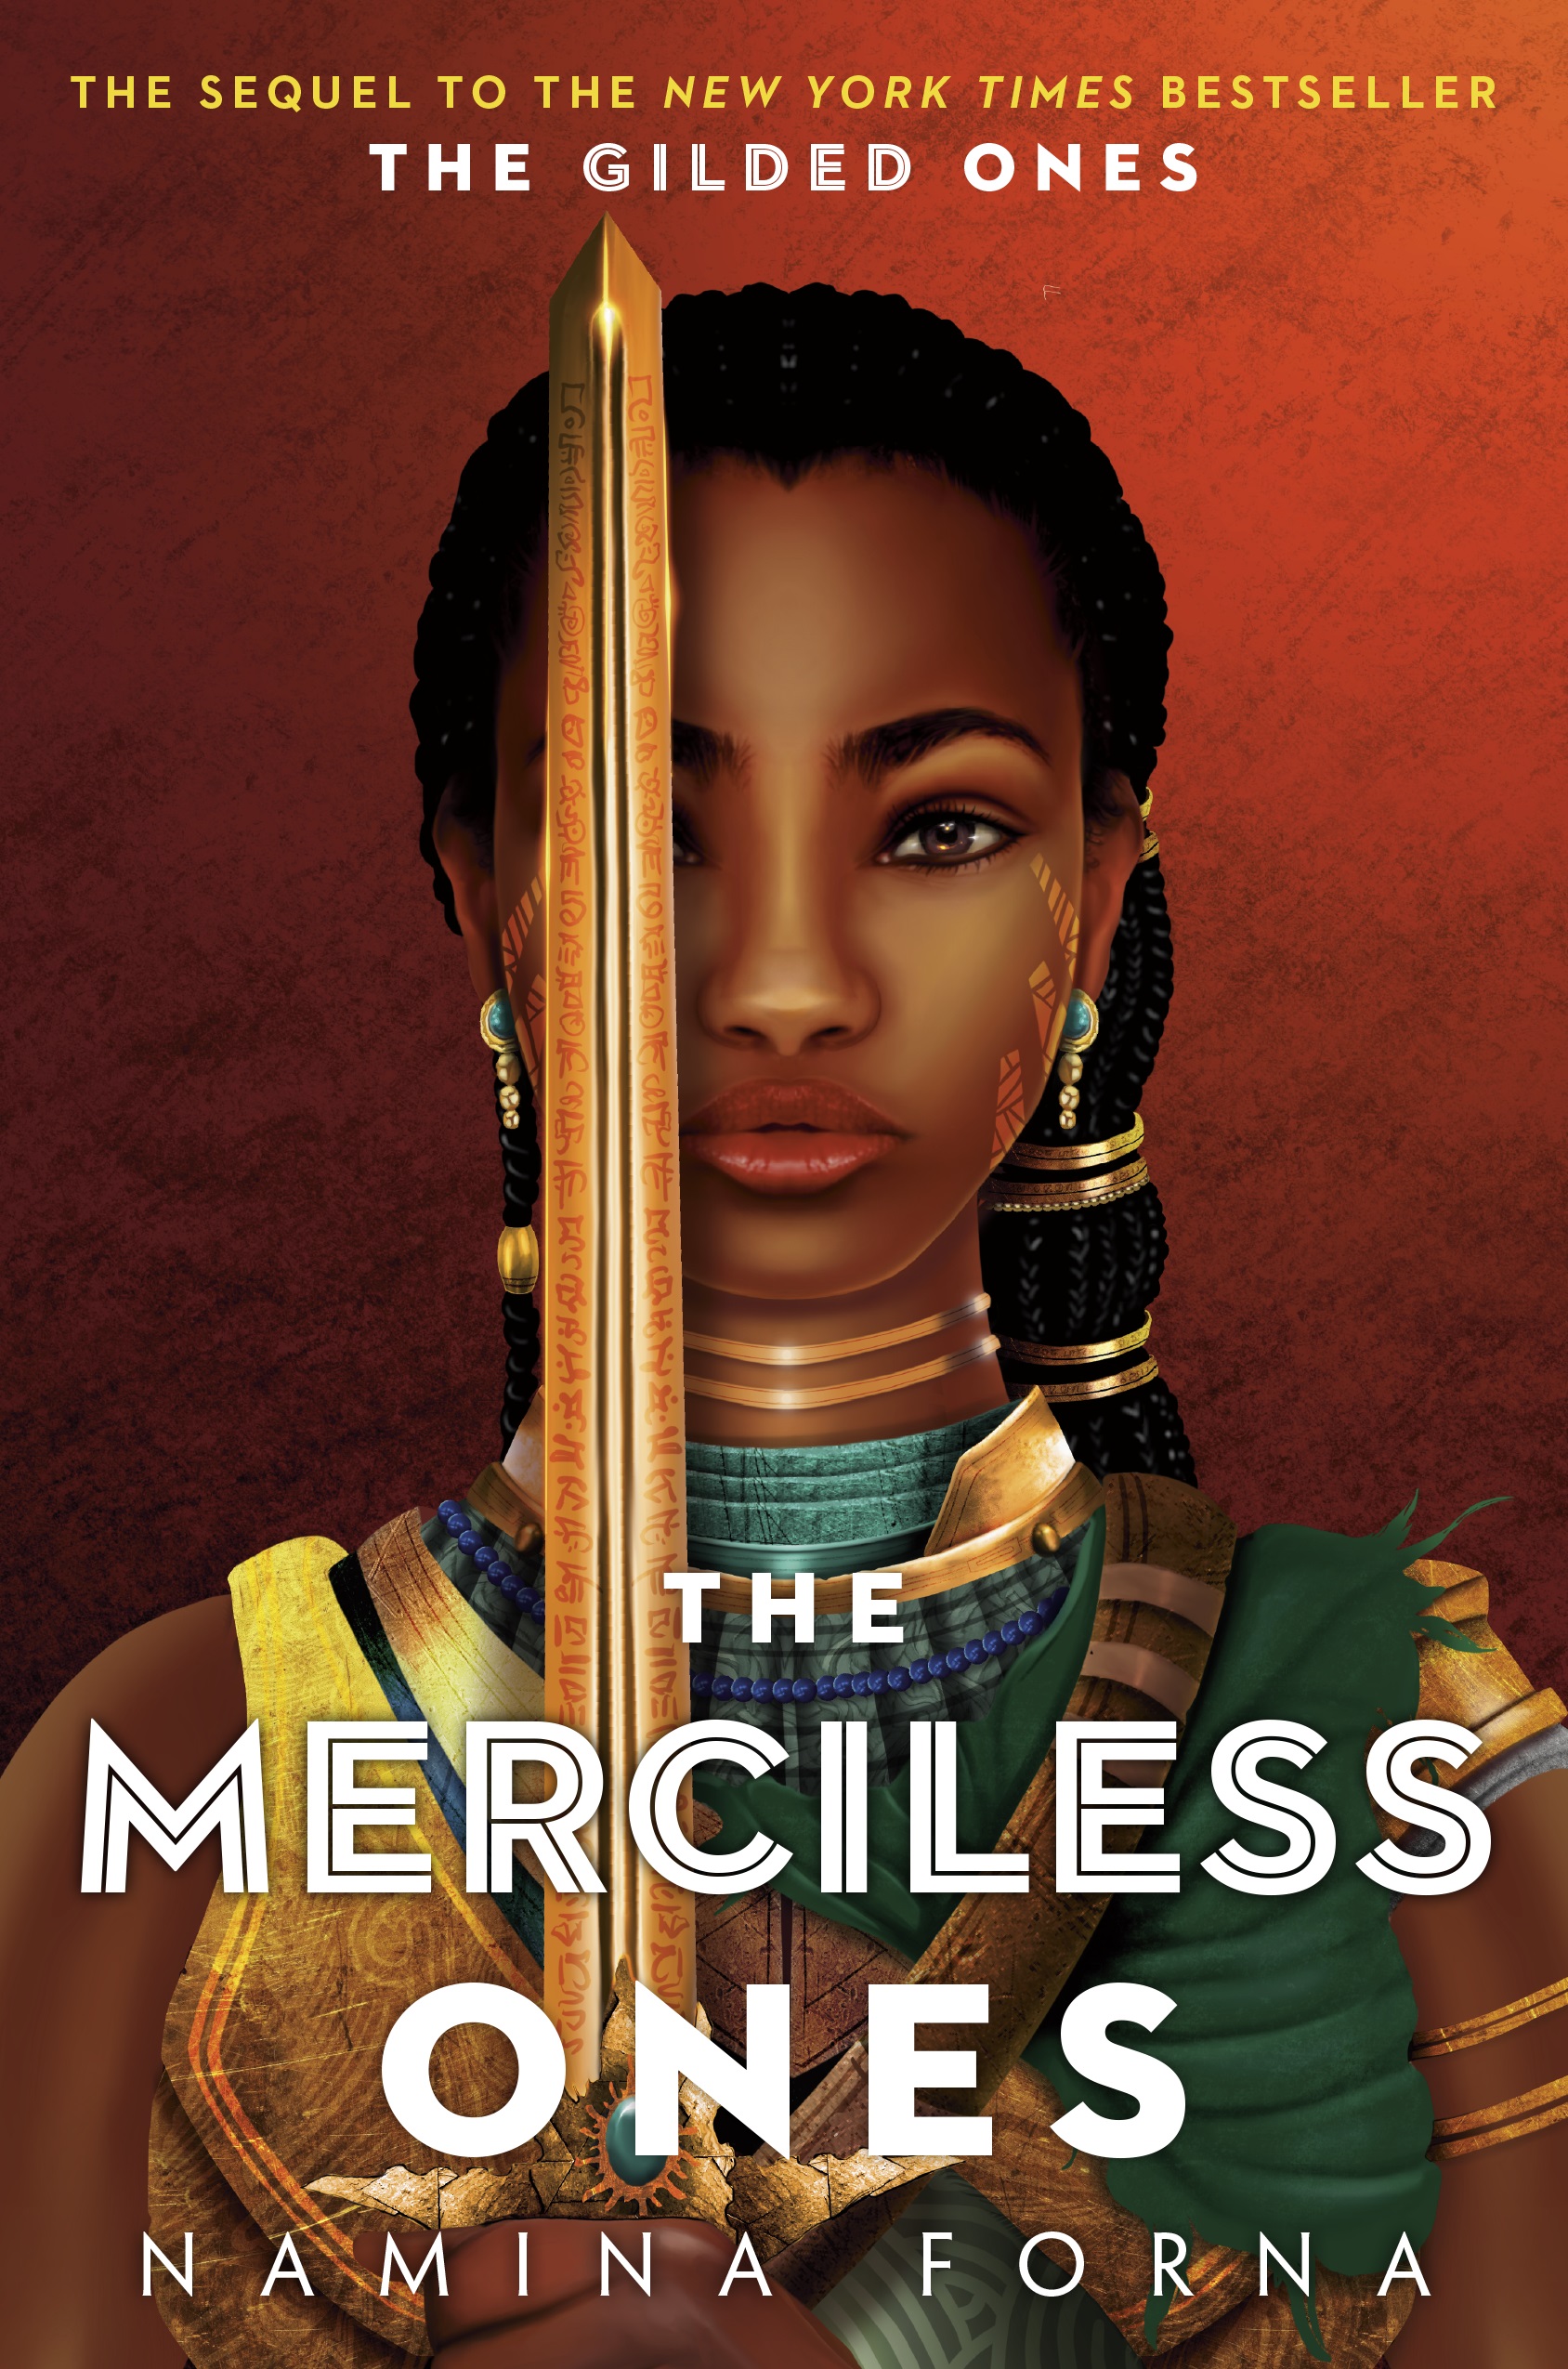 The Gilded Ones #2: The Merciless Ones Namina Forna Book Cover